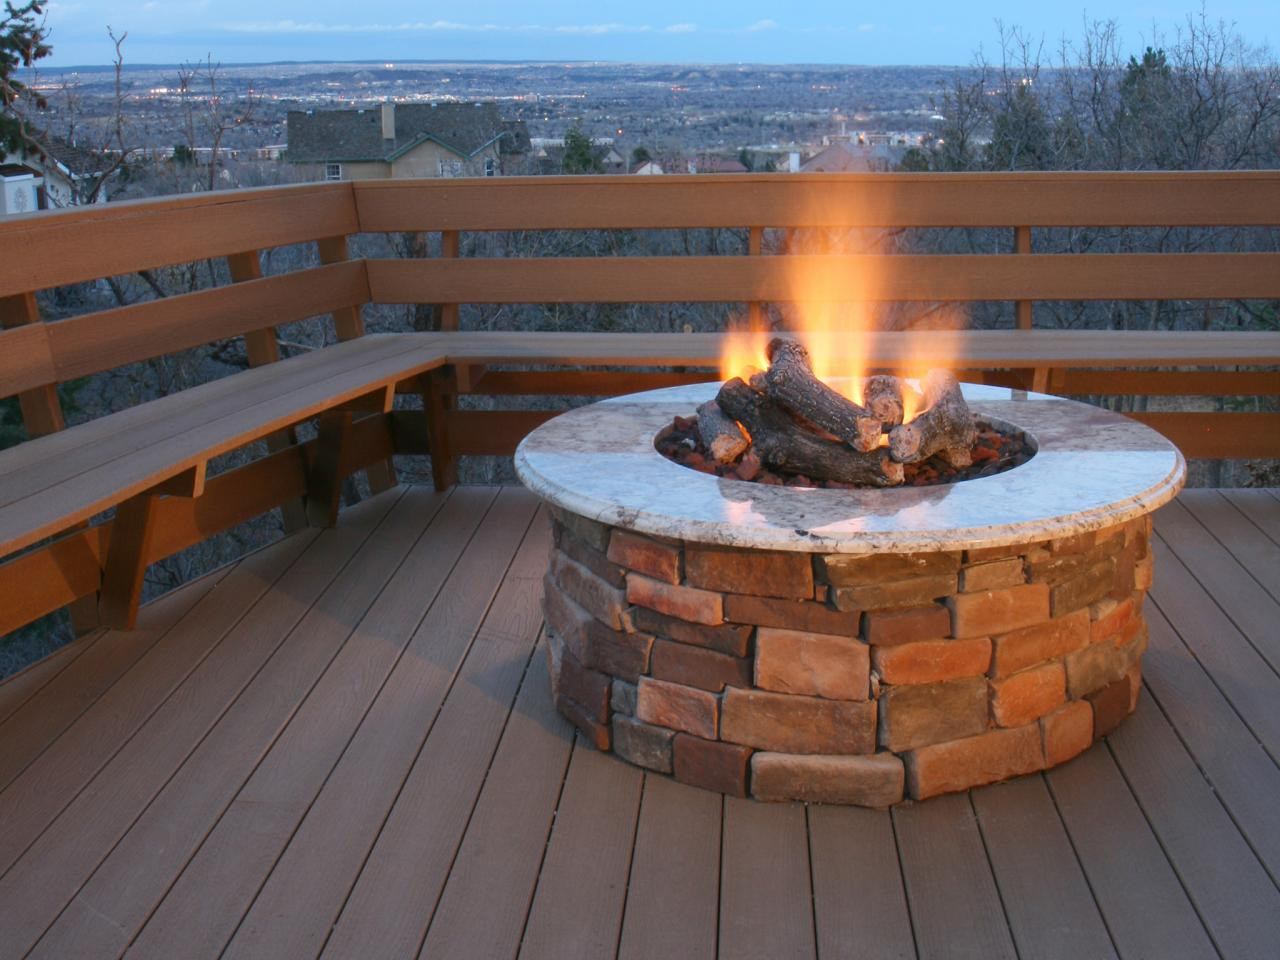 Propane Patio Fire Pit
 DIY Outdoor Propane Fire Pit